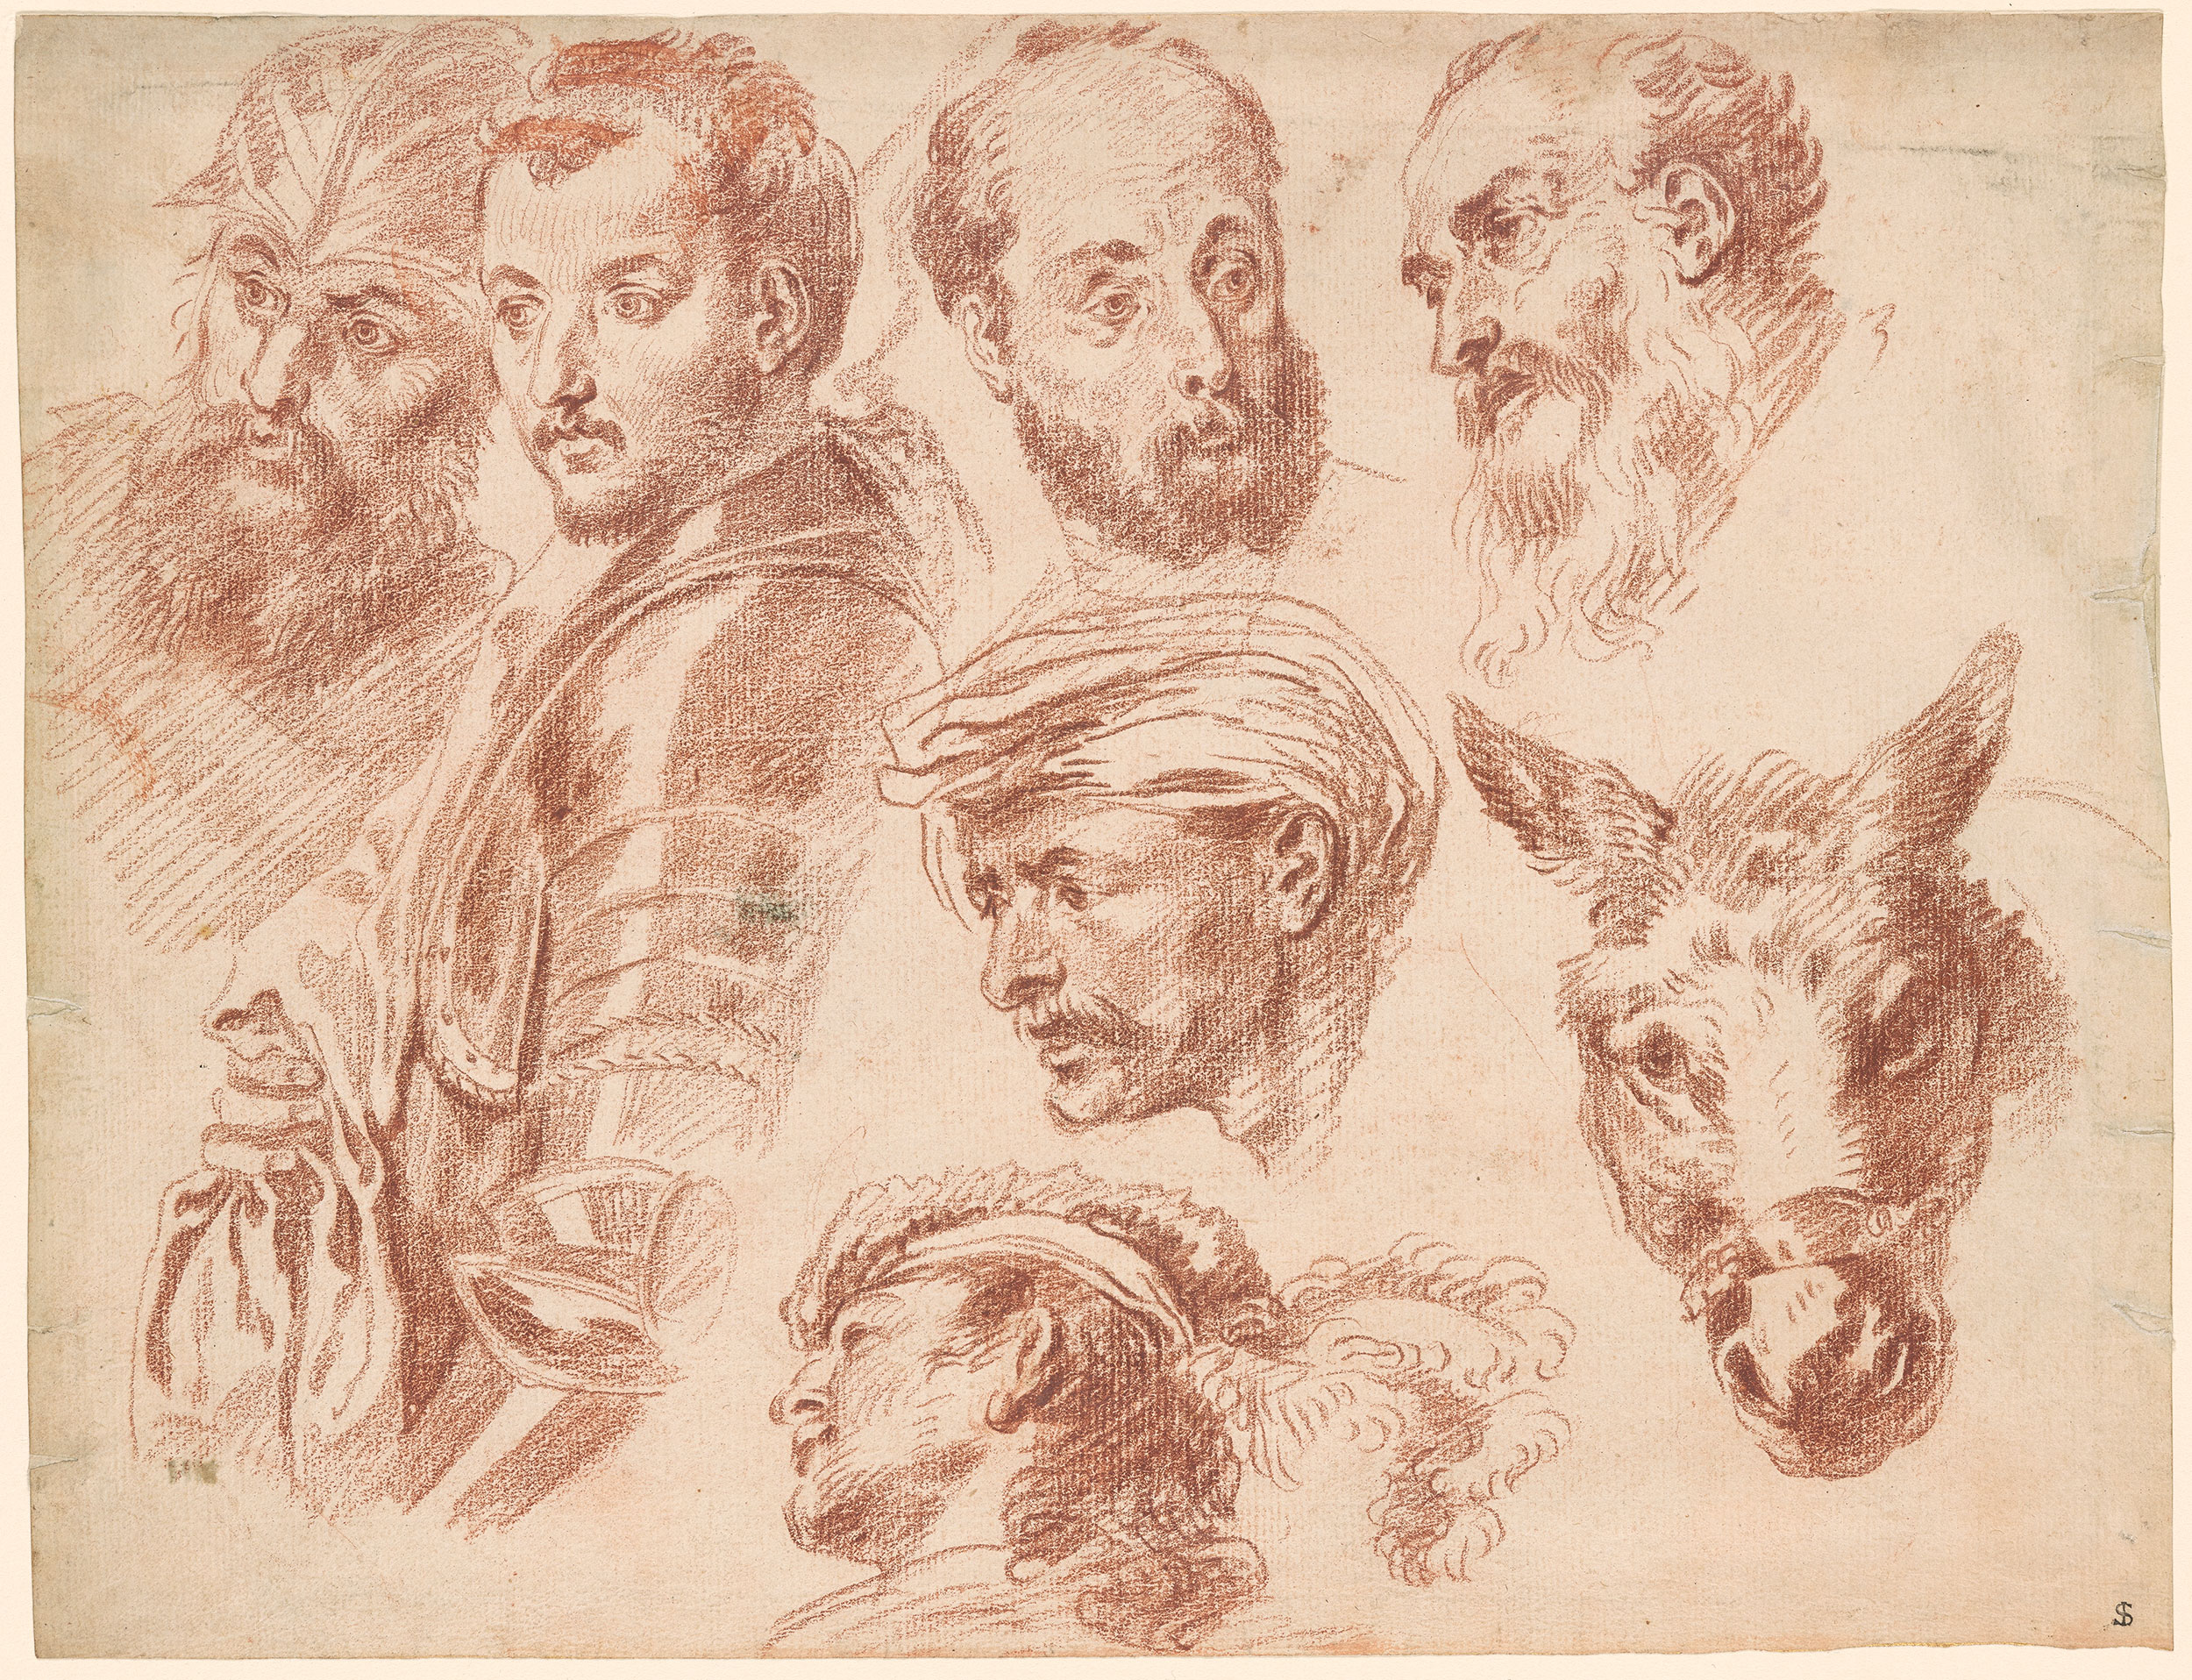 Antoine Watteau Sketches of Heads, and a Donkey Drawings Online